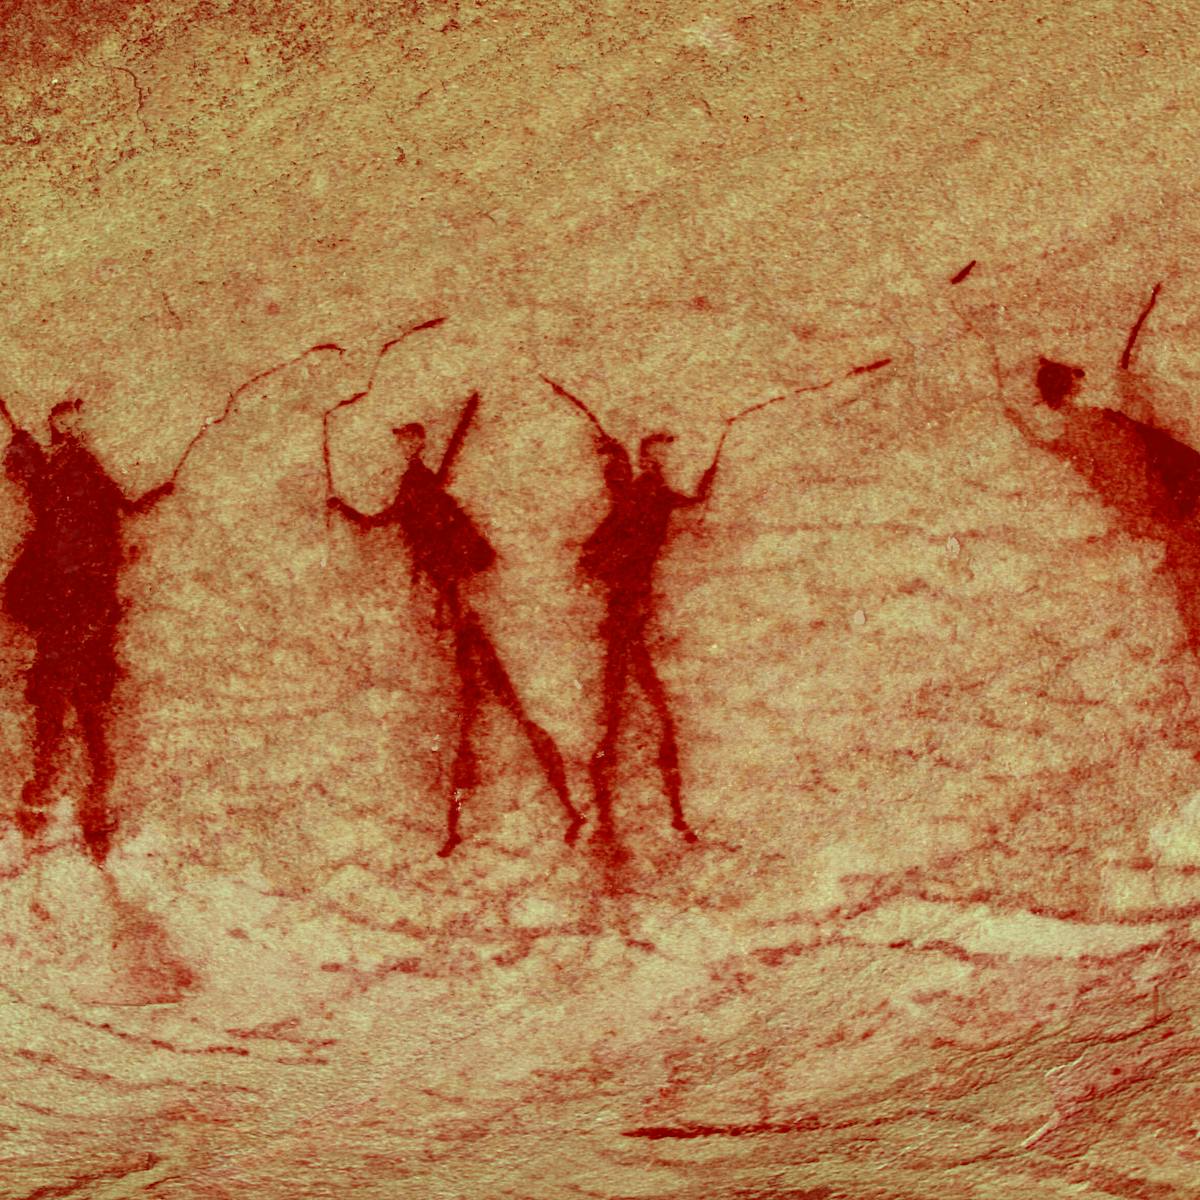 How the music of an ancient rock painting was brought to life